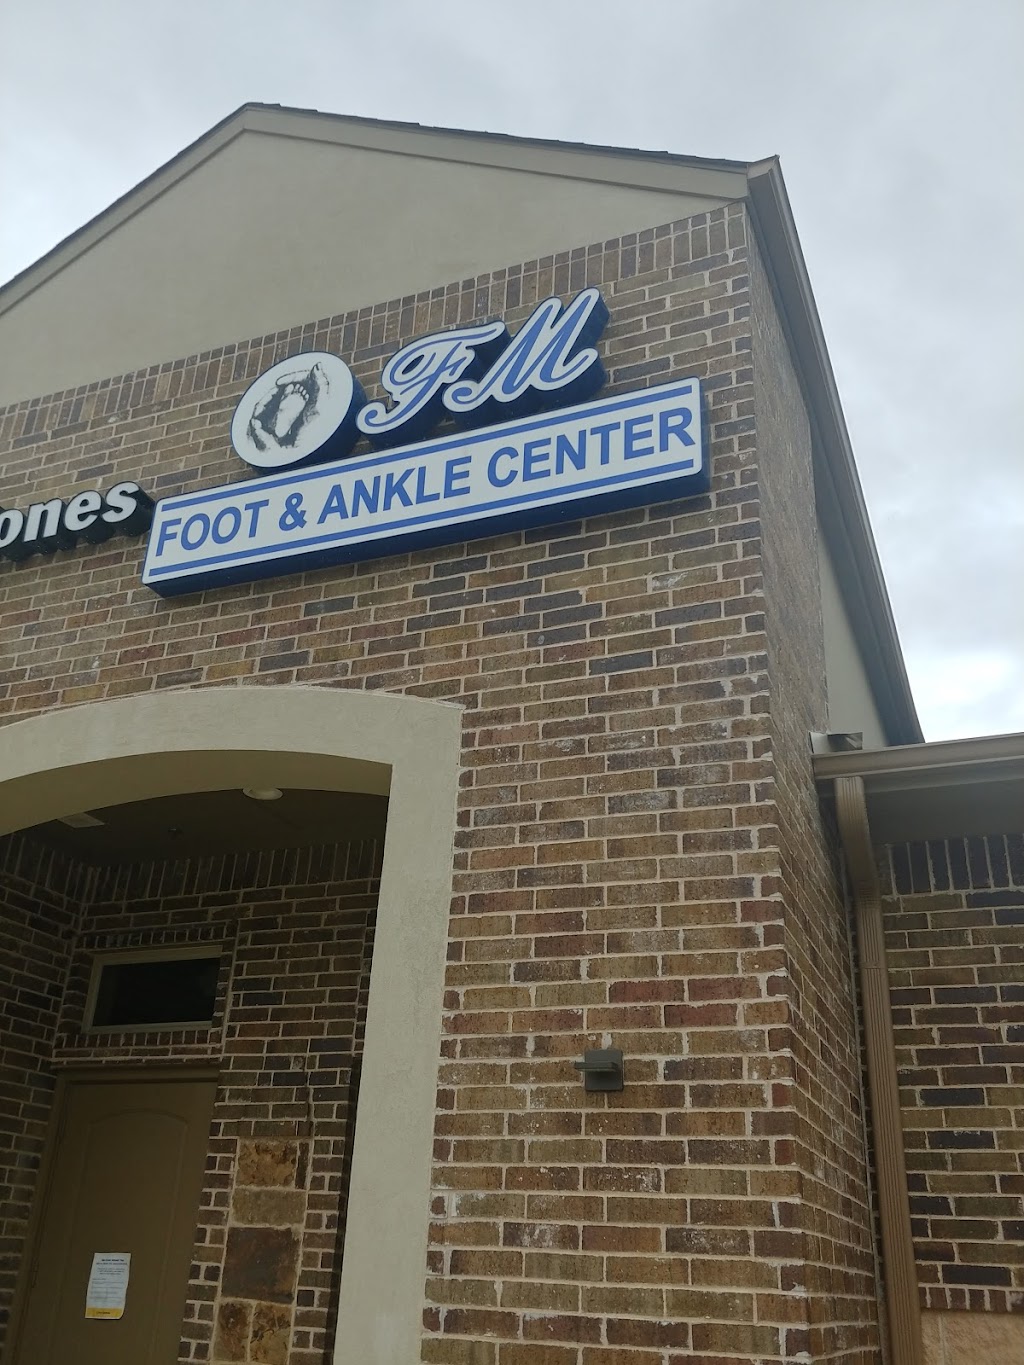 Flower Mound Foot and Ankle Center: Tommie Harris, DPM | 4491 Long Prairie Rd Suite 550, Flower Mound, TX 75028 | Phone: (972) 200-9823